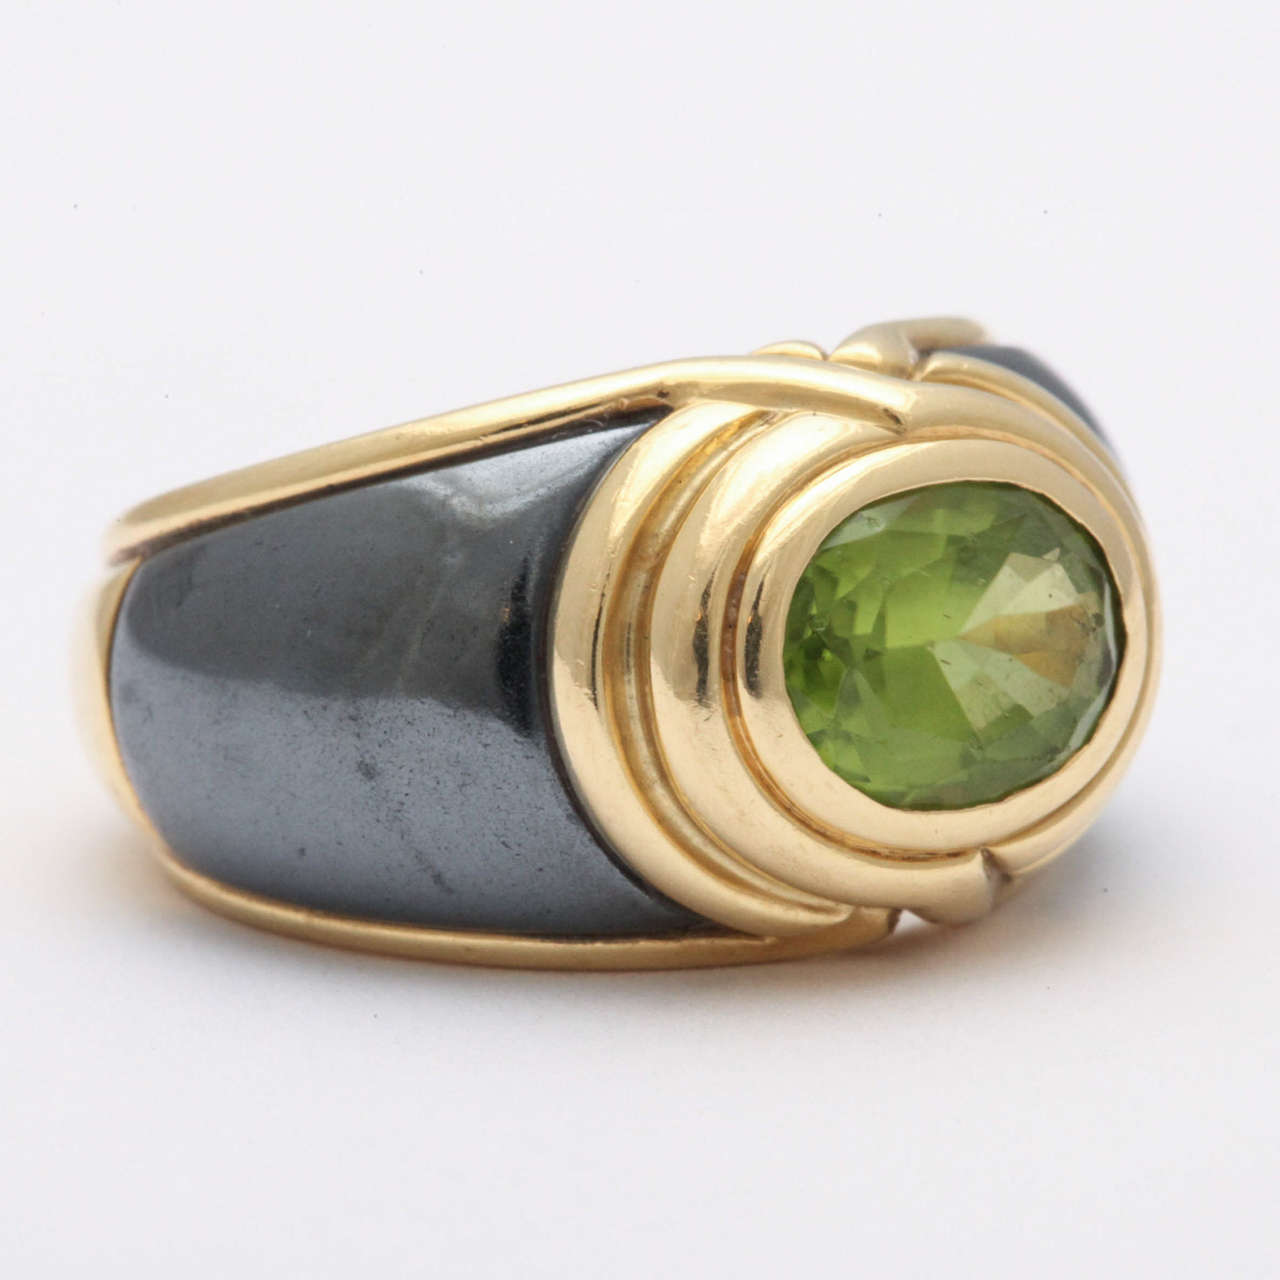 Signed Bulgari, Steel, 18kt Yellow Gold & Faceted Peridot Ring.   Very chic pinky Ring.